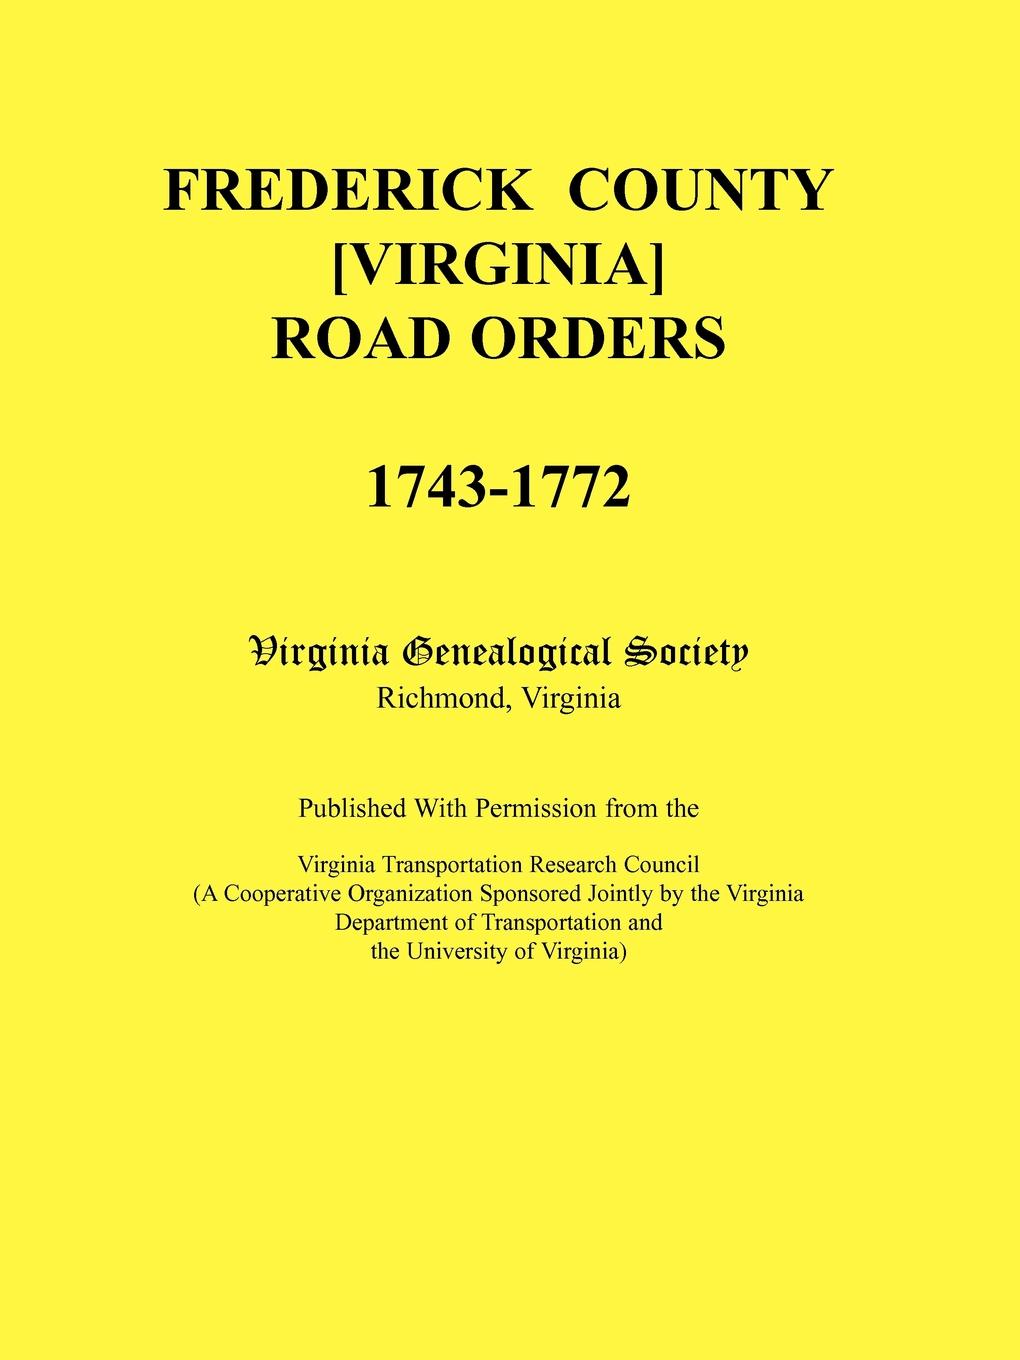 Frederick County, Virginia Road Orders, 1743-1772. Published With Permission from the Virginia Transportation Research Council (A Cooperative Organization Sponsored Jointly by the Virginia Department of Transportation and the University of Virginia